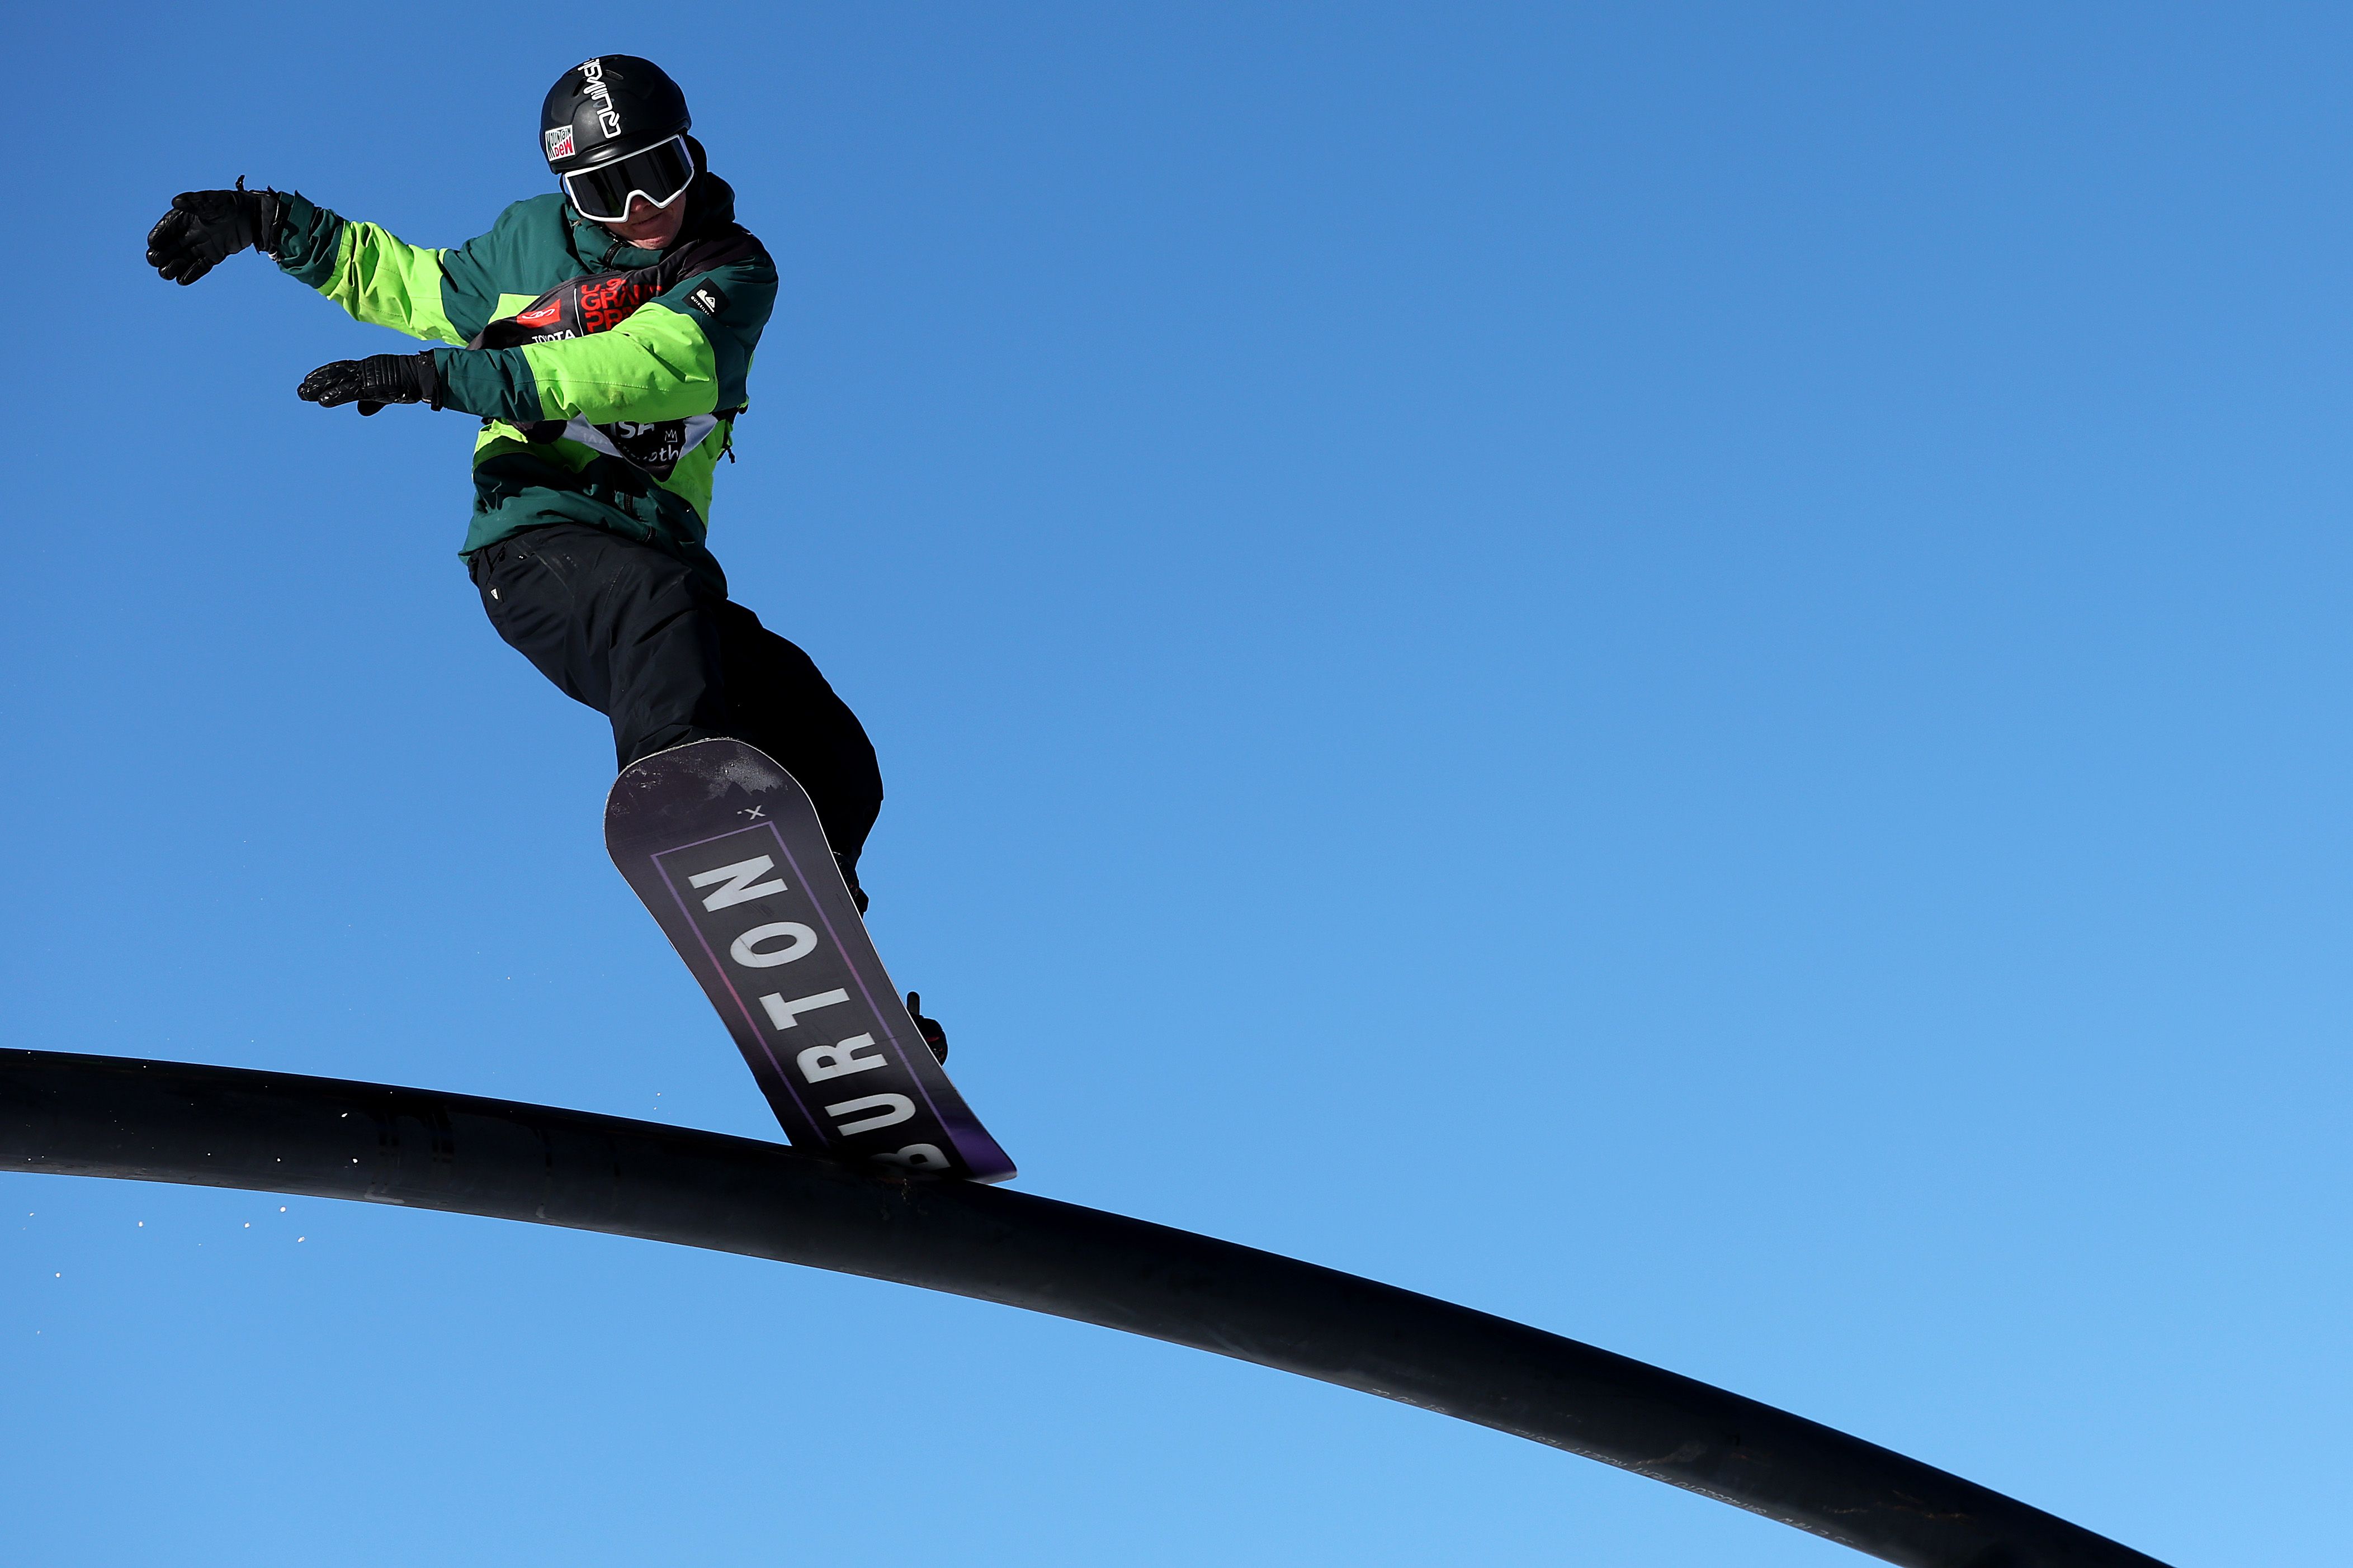 Red Gerard of Team United States takes a training run for the Men's Snowboard Slopestyle competition at the Toyota U.S. Grand Prix at Mammoth Mountain on January 05, 2022 in Mammoth, California.